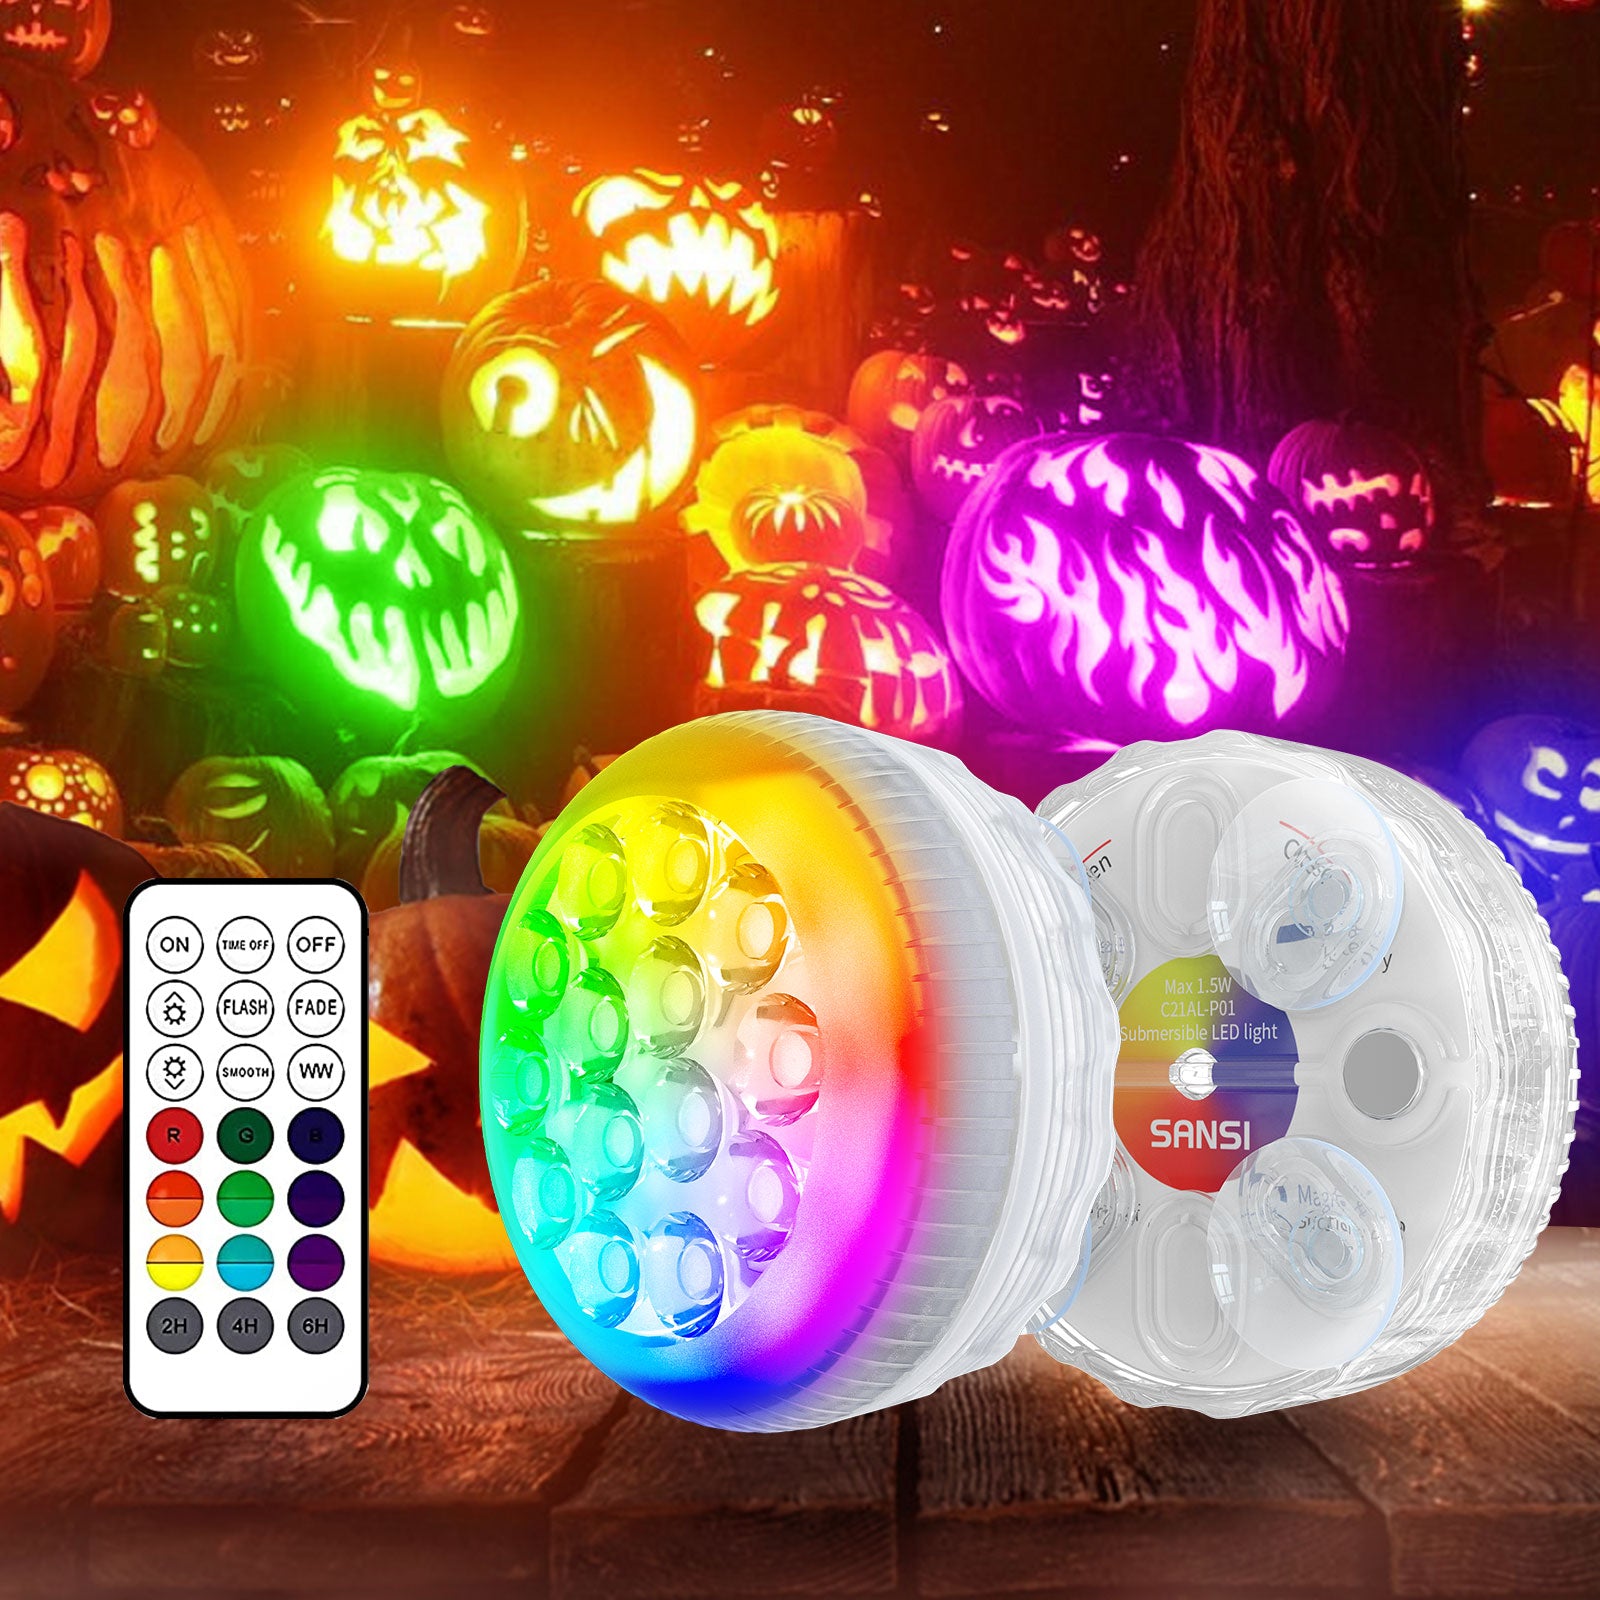 Upgraded RGB LED Light can be halloween decor